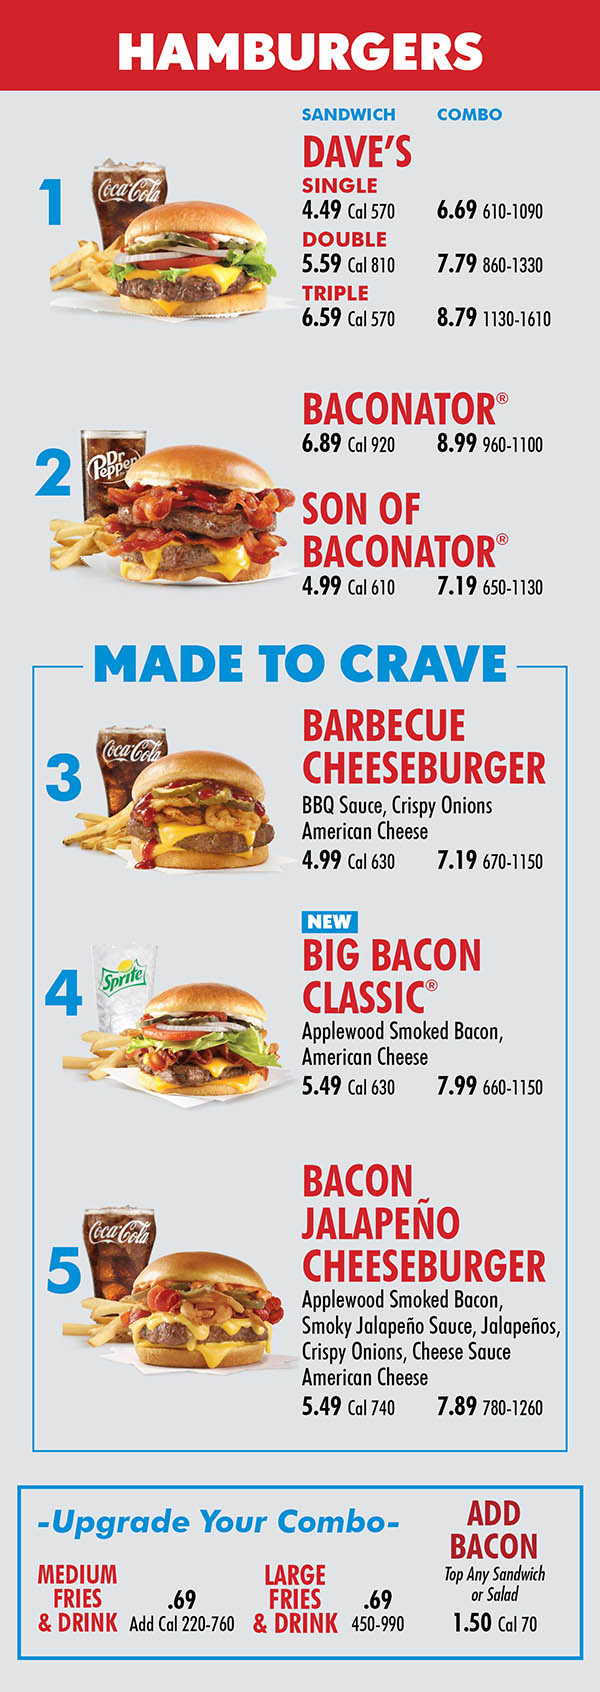 Wendy's Menu N 48th St Lincoln NE Page 1
HAMBURGERS
SANDWICH COMBO
DAVE’S
SINGLE
4.49 Cal 570 6.69 610-1090
DOUBLE
5.59 Cal 810 7.79 860-1330
TRIPLE
6.59 Cal 570 8.79 1130-1610
BACONATOR®
6.89 Cal 920 8.99 960-1100
SON OF
BACONATOR®
4.99 Cal 610 7.19 650-1130
BARBECUE
CHEESEBURGER
BBQ Sauce, Crispy Onions
American Cheese
4.99 Cal 630 7.19 670-1150
BIG BACON
CLASSIC®
Applewood Smoked Bacon,
American Cheese
5.49 Cal 630 7.99 660-1150
BACON
JALAPEÑO
CHEESEBURGER
Applewood Smoked Bacon,
Smoky Jalapeño Sauce, Jalapeños,
Crispy Onions, Cheese Sauce
American Cheese
5.49 Cal 740 7.89 780-1260
1
2
MADE TO CRAVE
3
4
5
-Upgrade Your Combo-
ADD
BACON
MEDIUM
FRIES
& DRINK
LARGE
FRIES
& DRINK
.69
Add Cal 220-760
.69
450-990
Top Any Sandwich or Salad
1.50 Cal 70